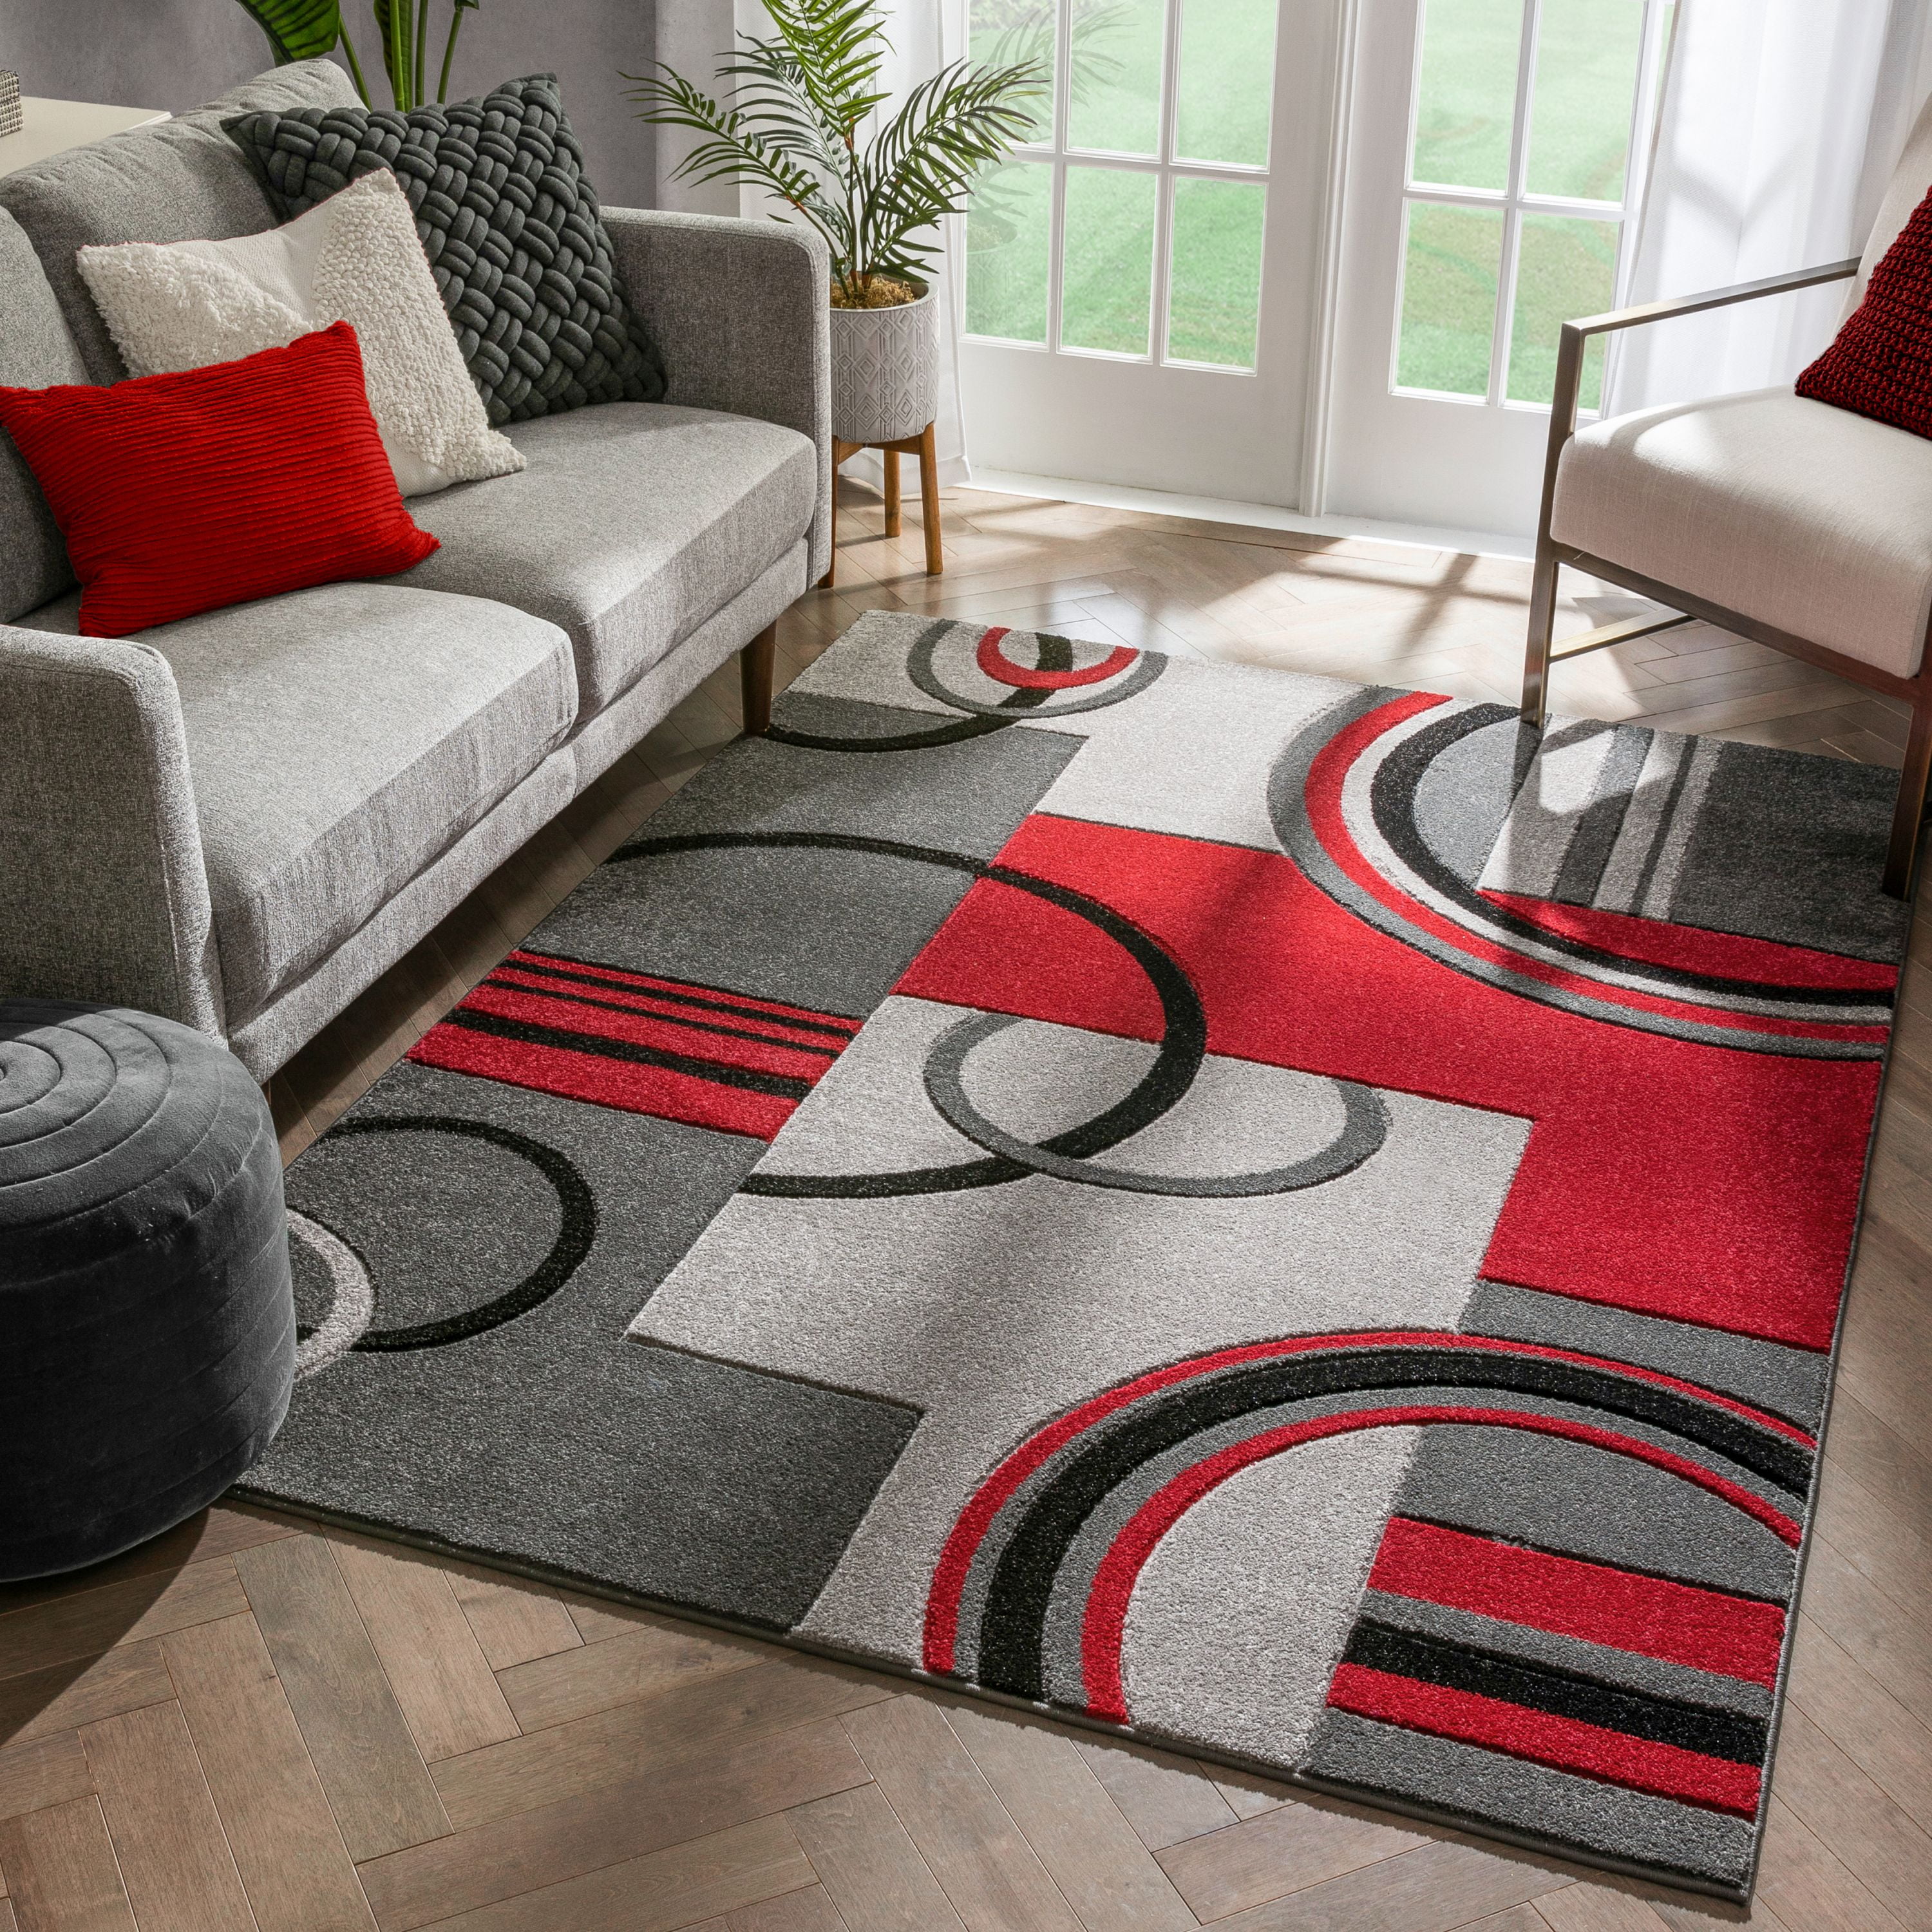 Classic Red Patchwork Dining Room Rugs Round Circle Warm Living Room Rugs 